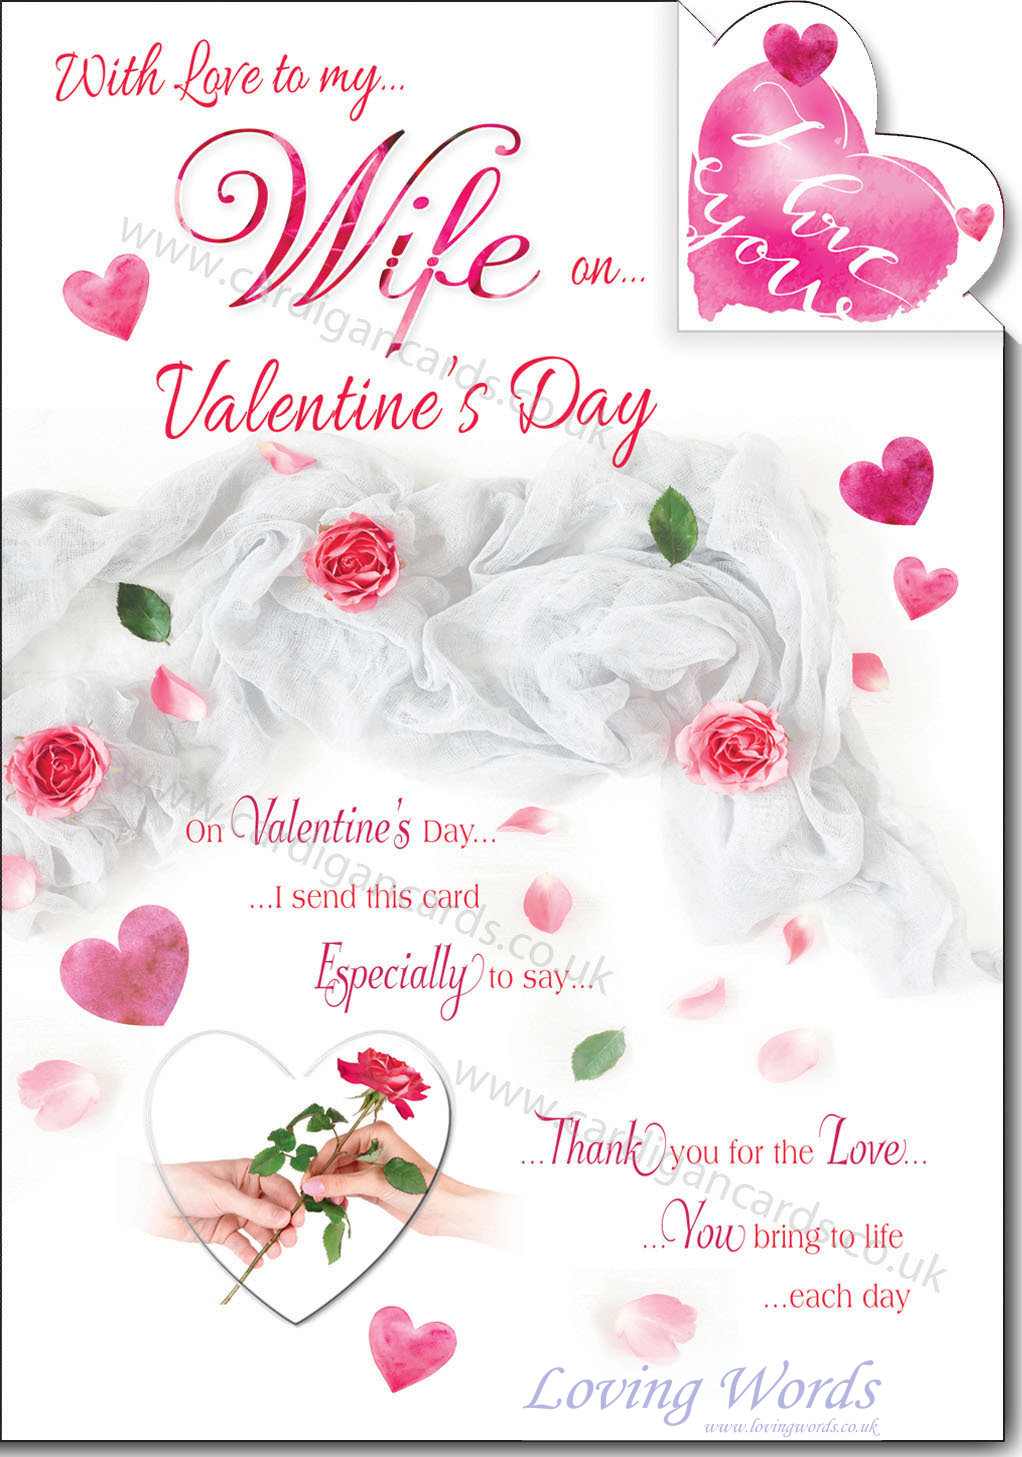 wife-on-valentine-s-day-greeting-cards-by-loving-words